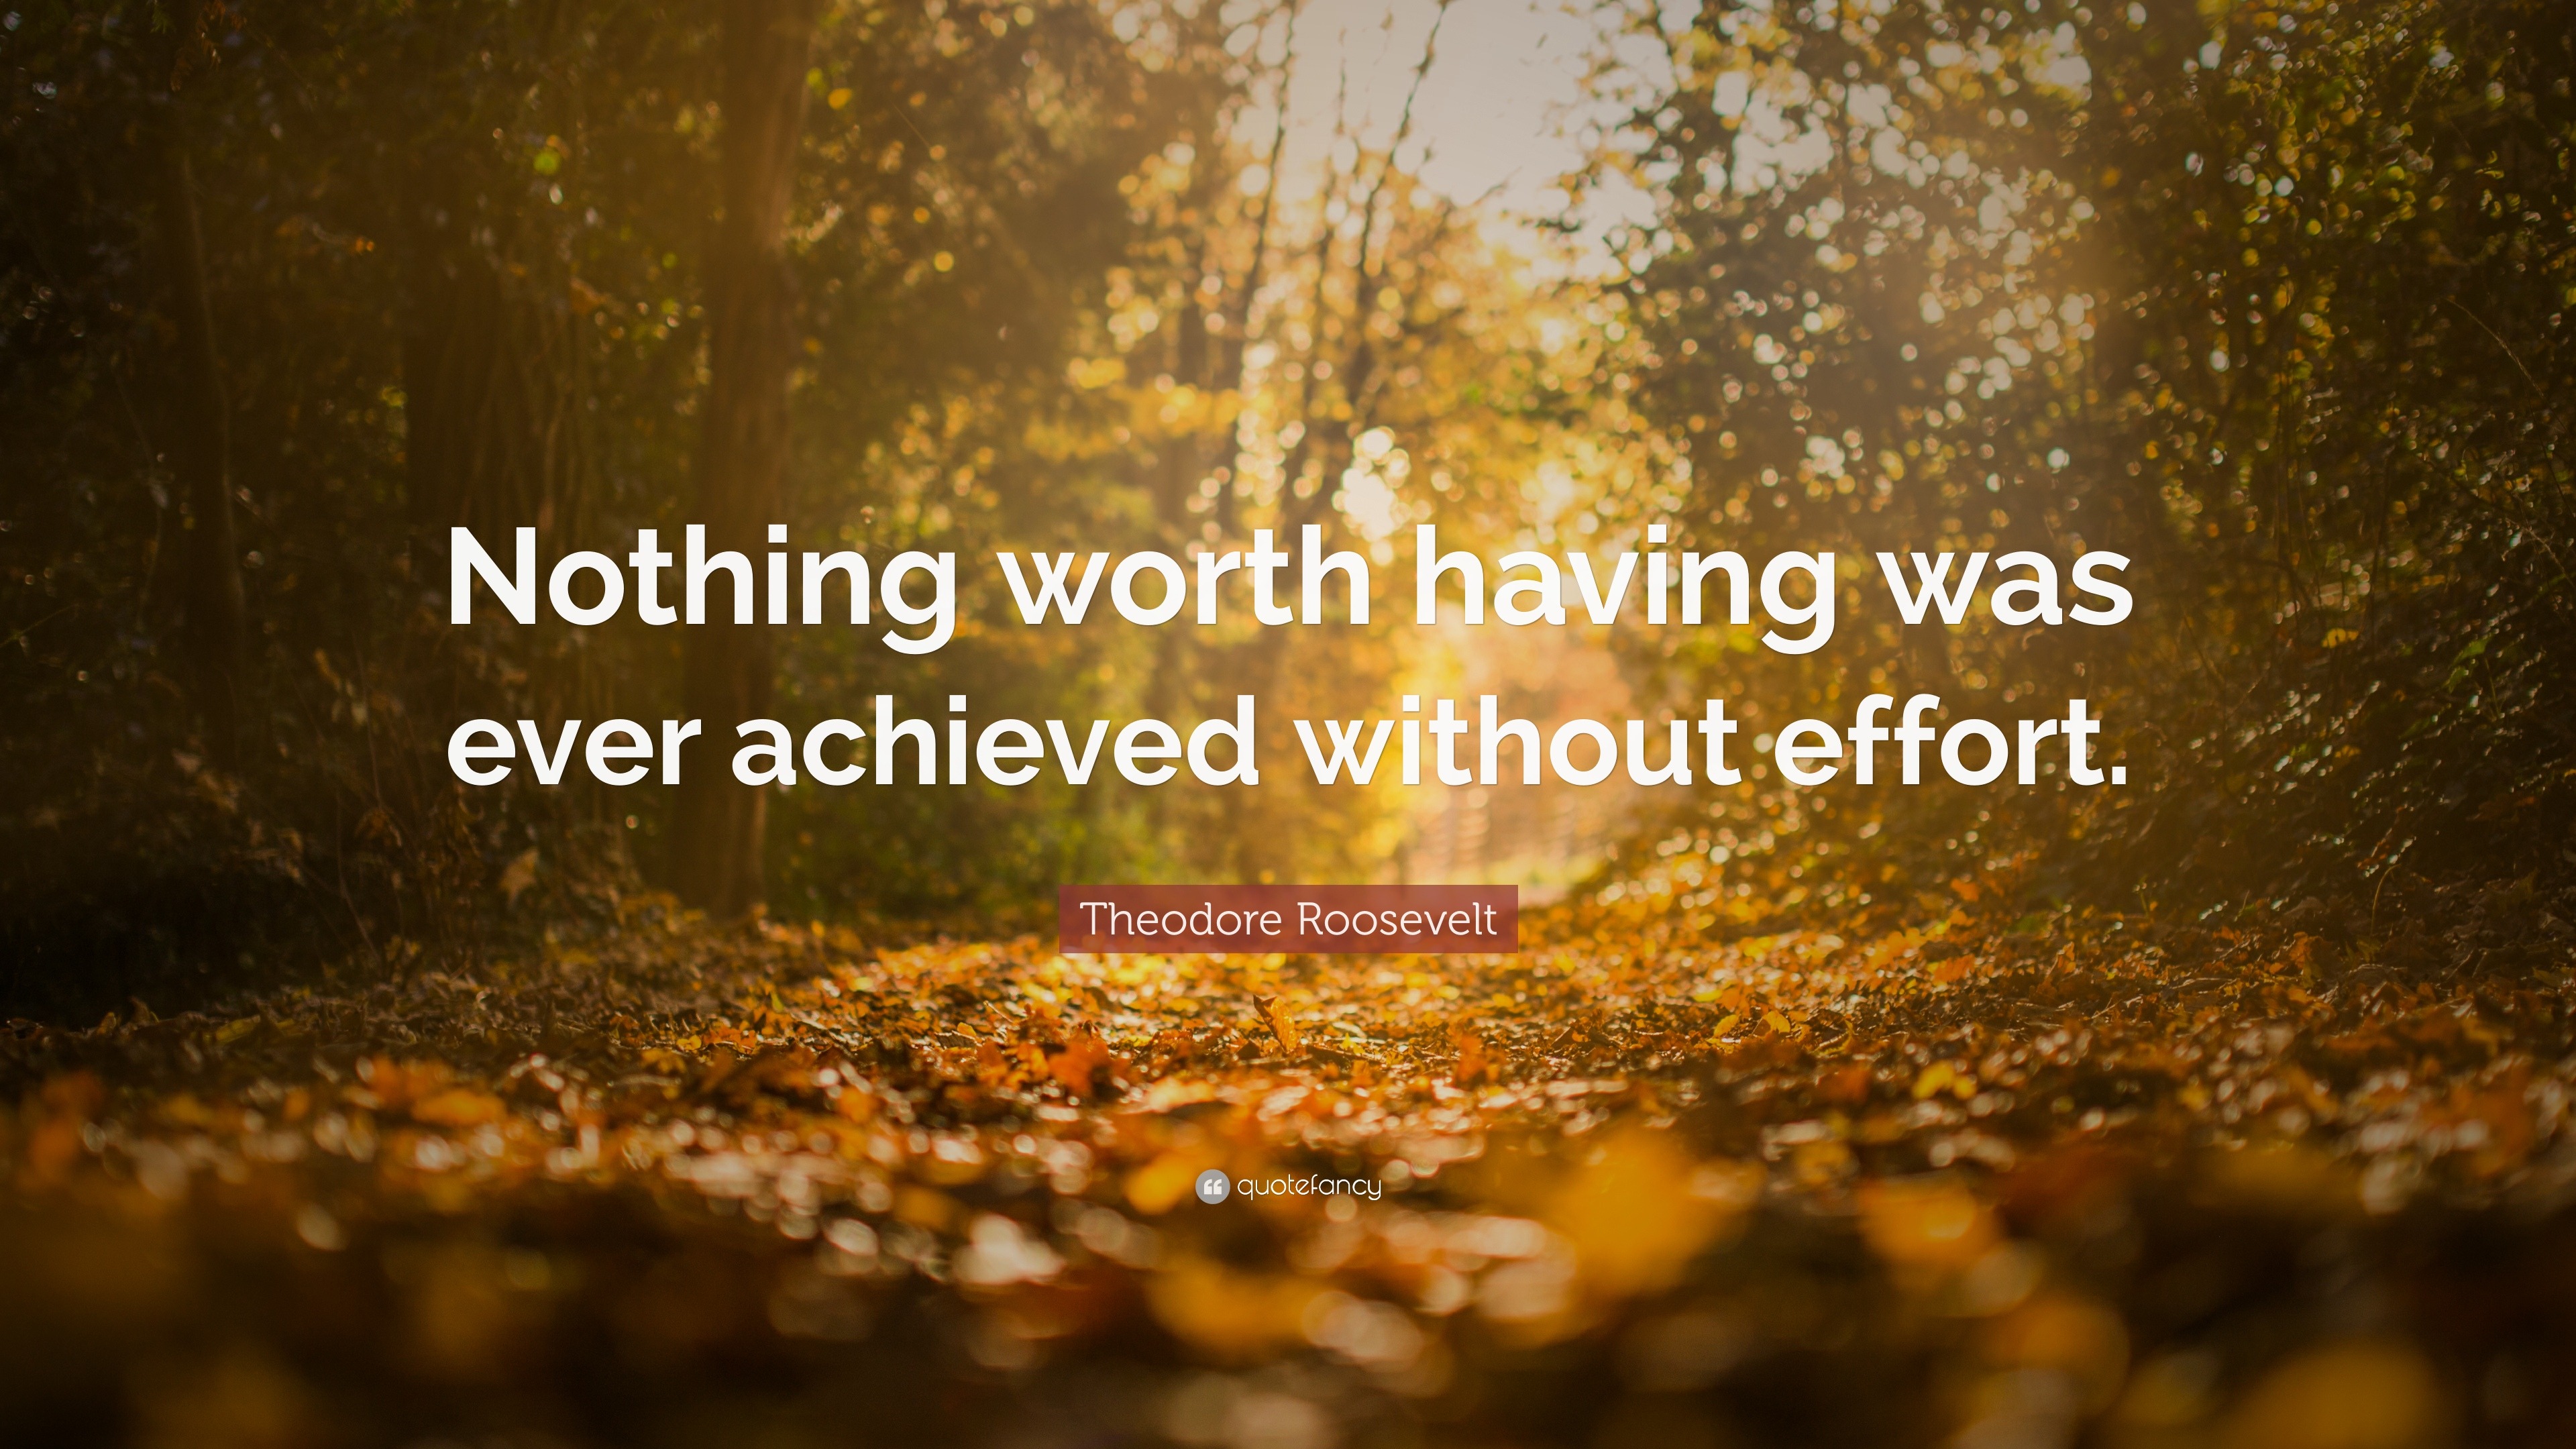 Theodore Roosevelt Quotes (100 wallpapers) - Quotefancy